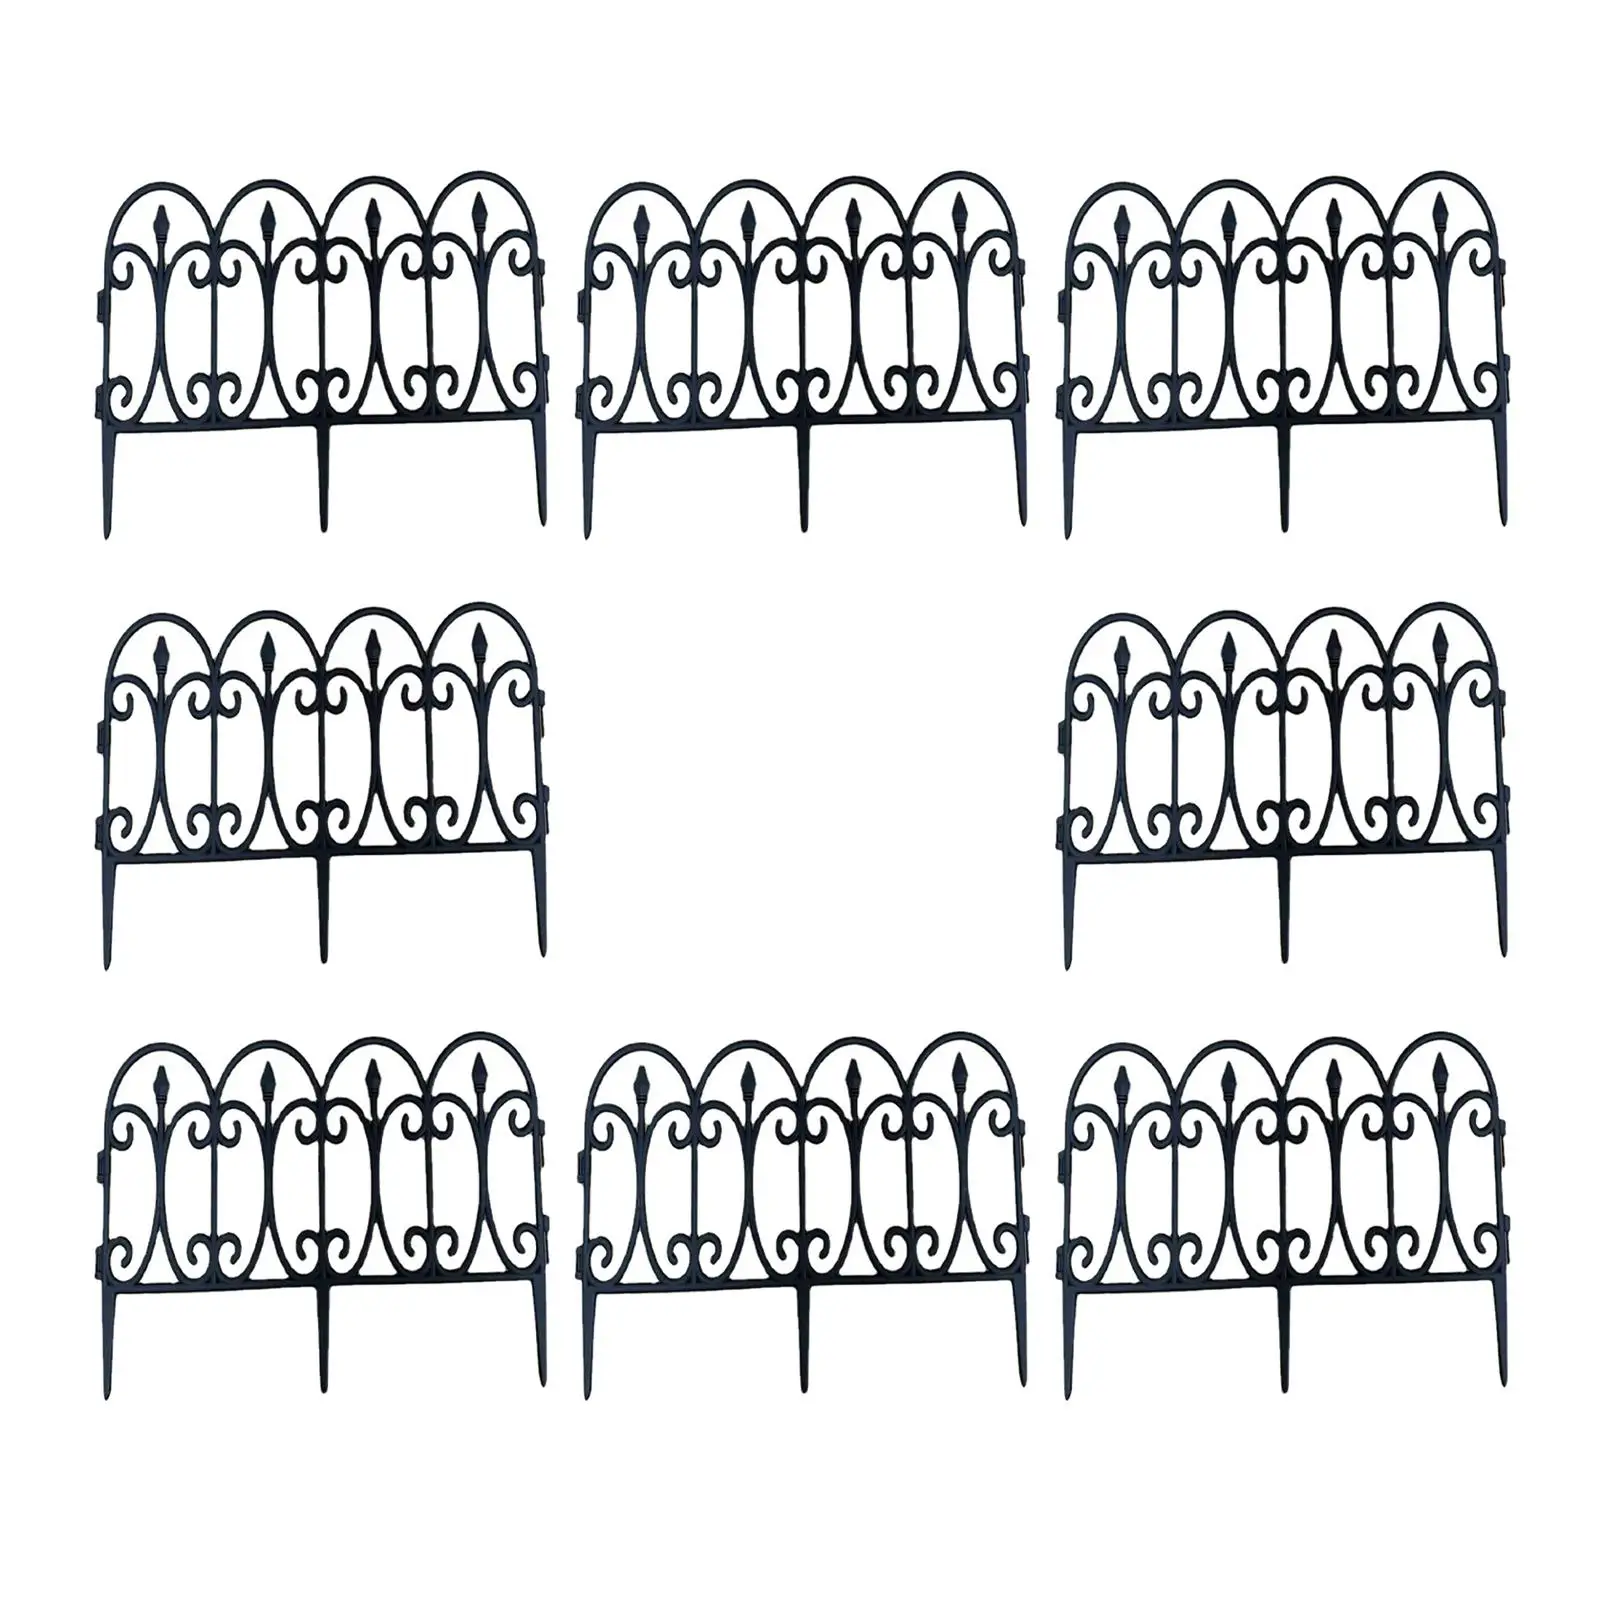 Garden Picket Fence 23.6x13inch Edging Garden Border Fence Animal Barrier for Dogs Walkway Balcony Outdoor Landscaping Plant